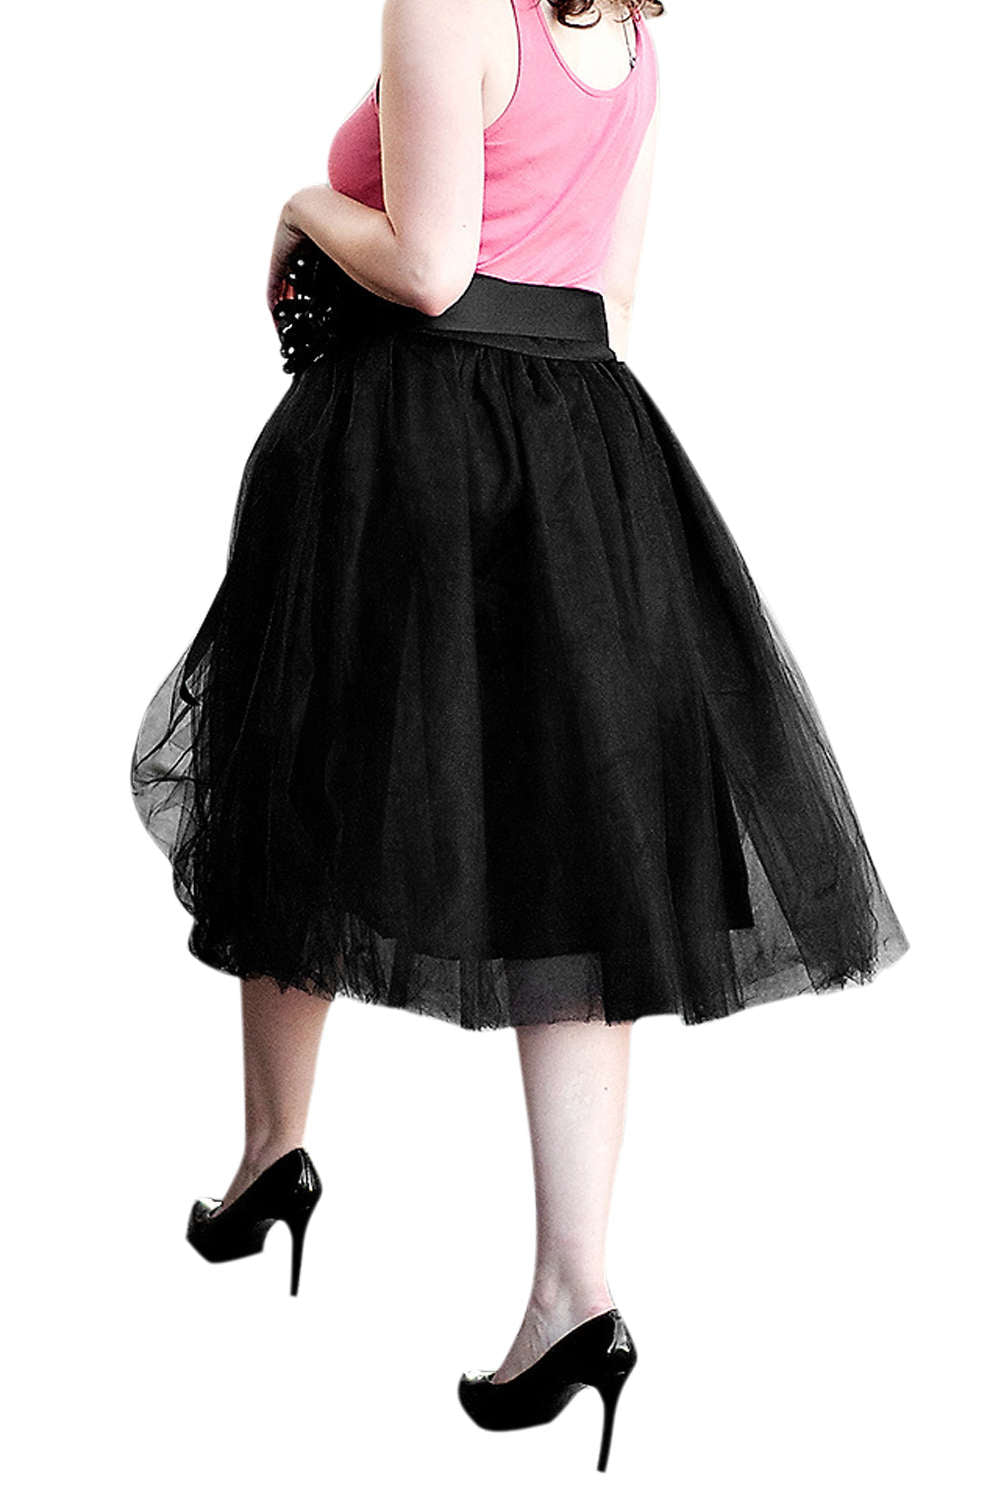 Iyasson Women's A Line Knee Length Tutu Tulle Prom Party Skirt